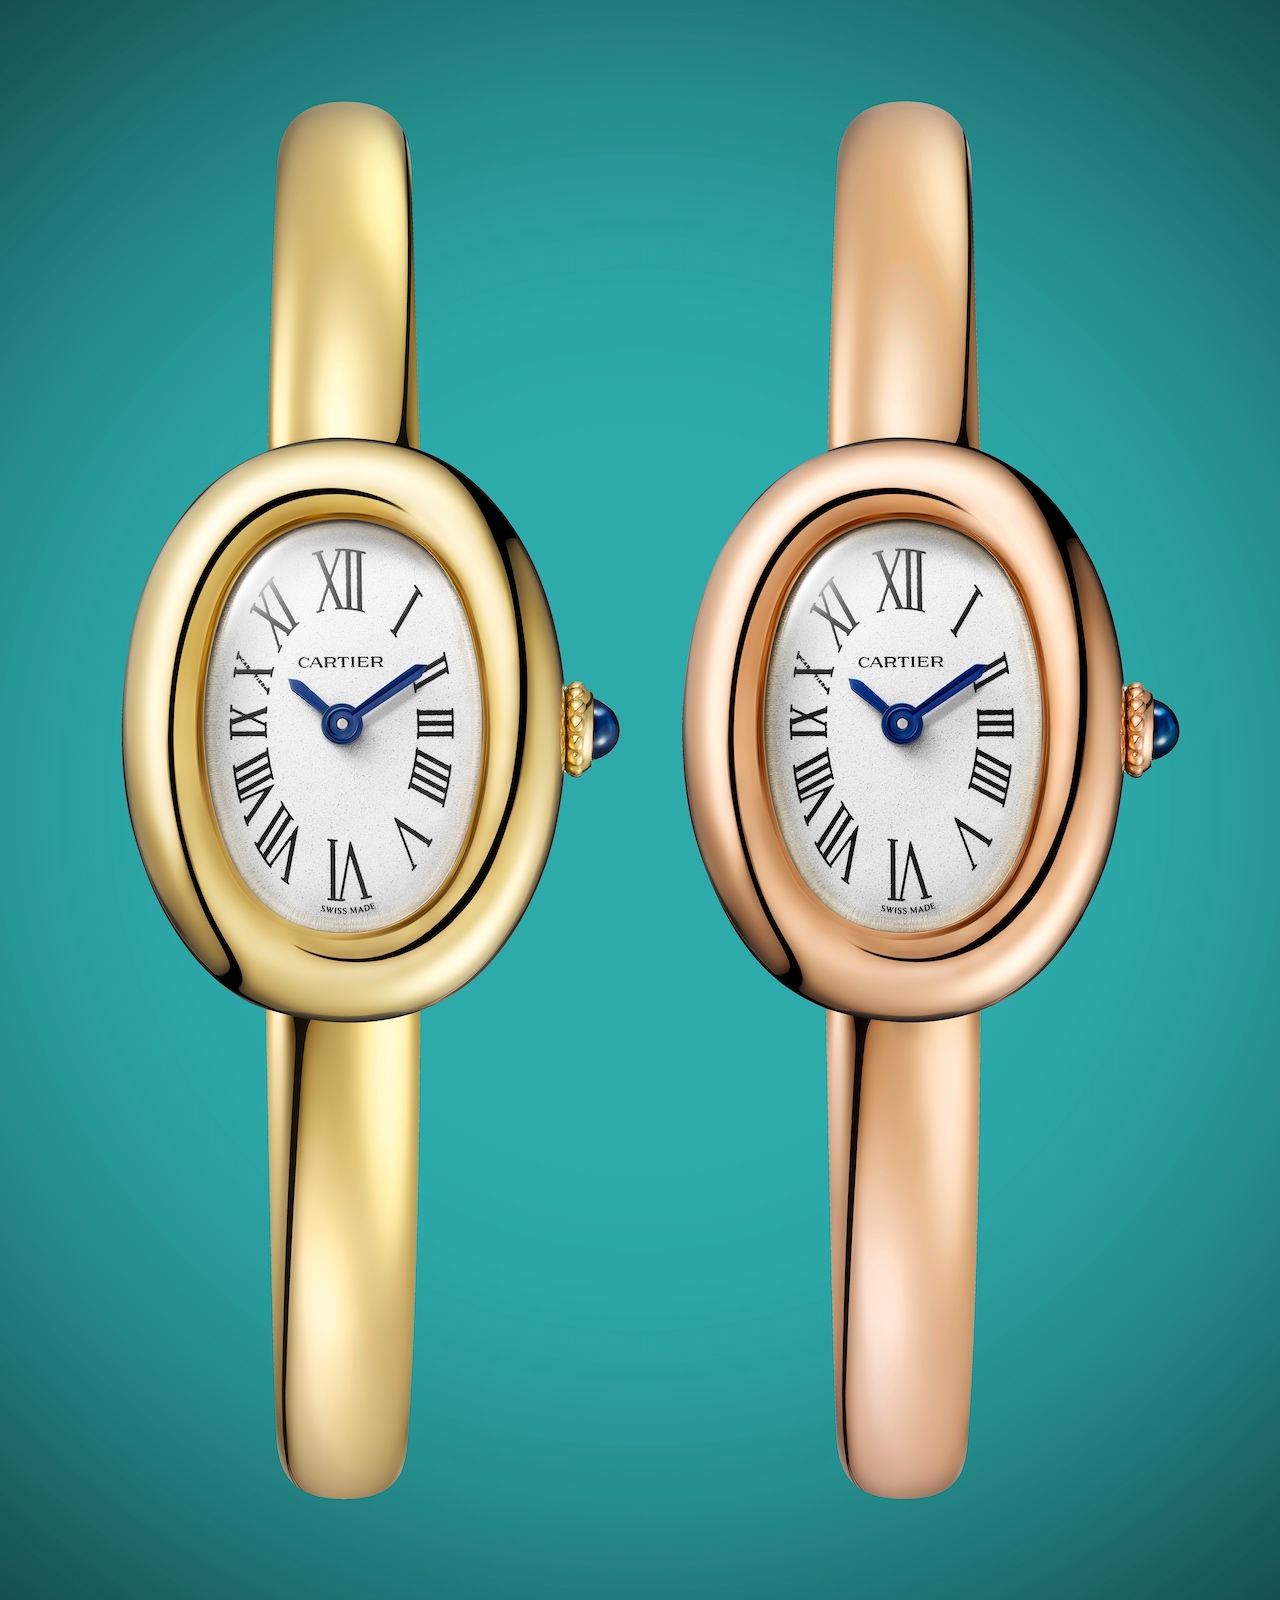 Cartier en Watches and Wonders 2023 - Baignoire duo FG